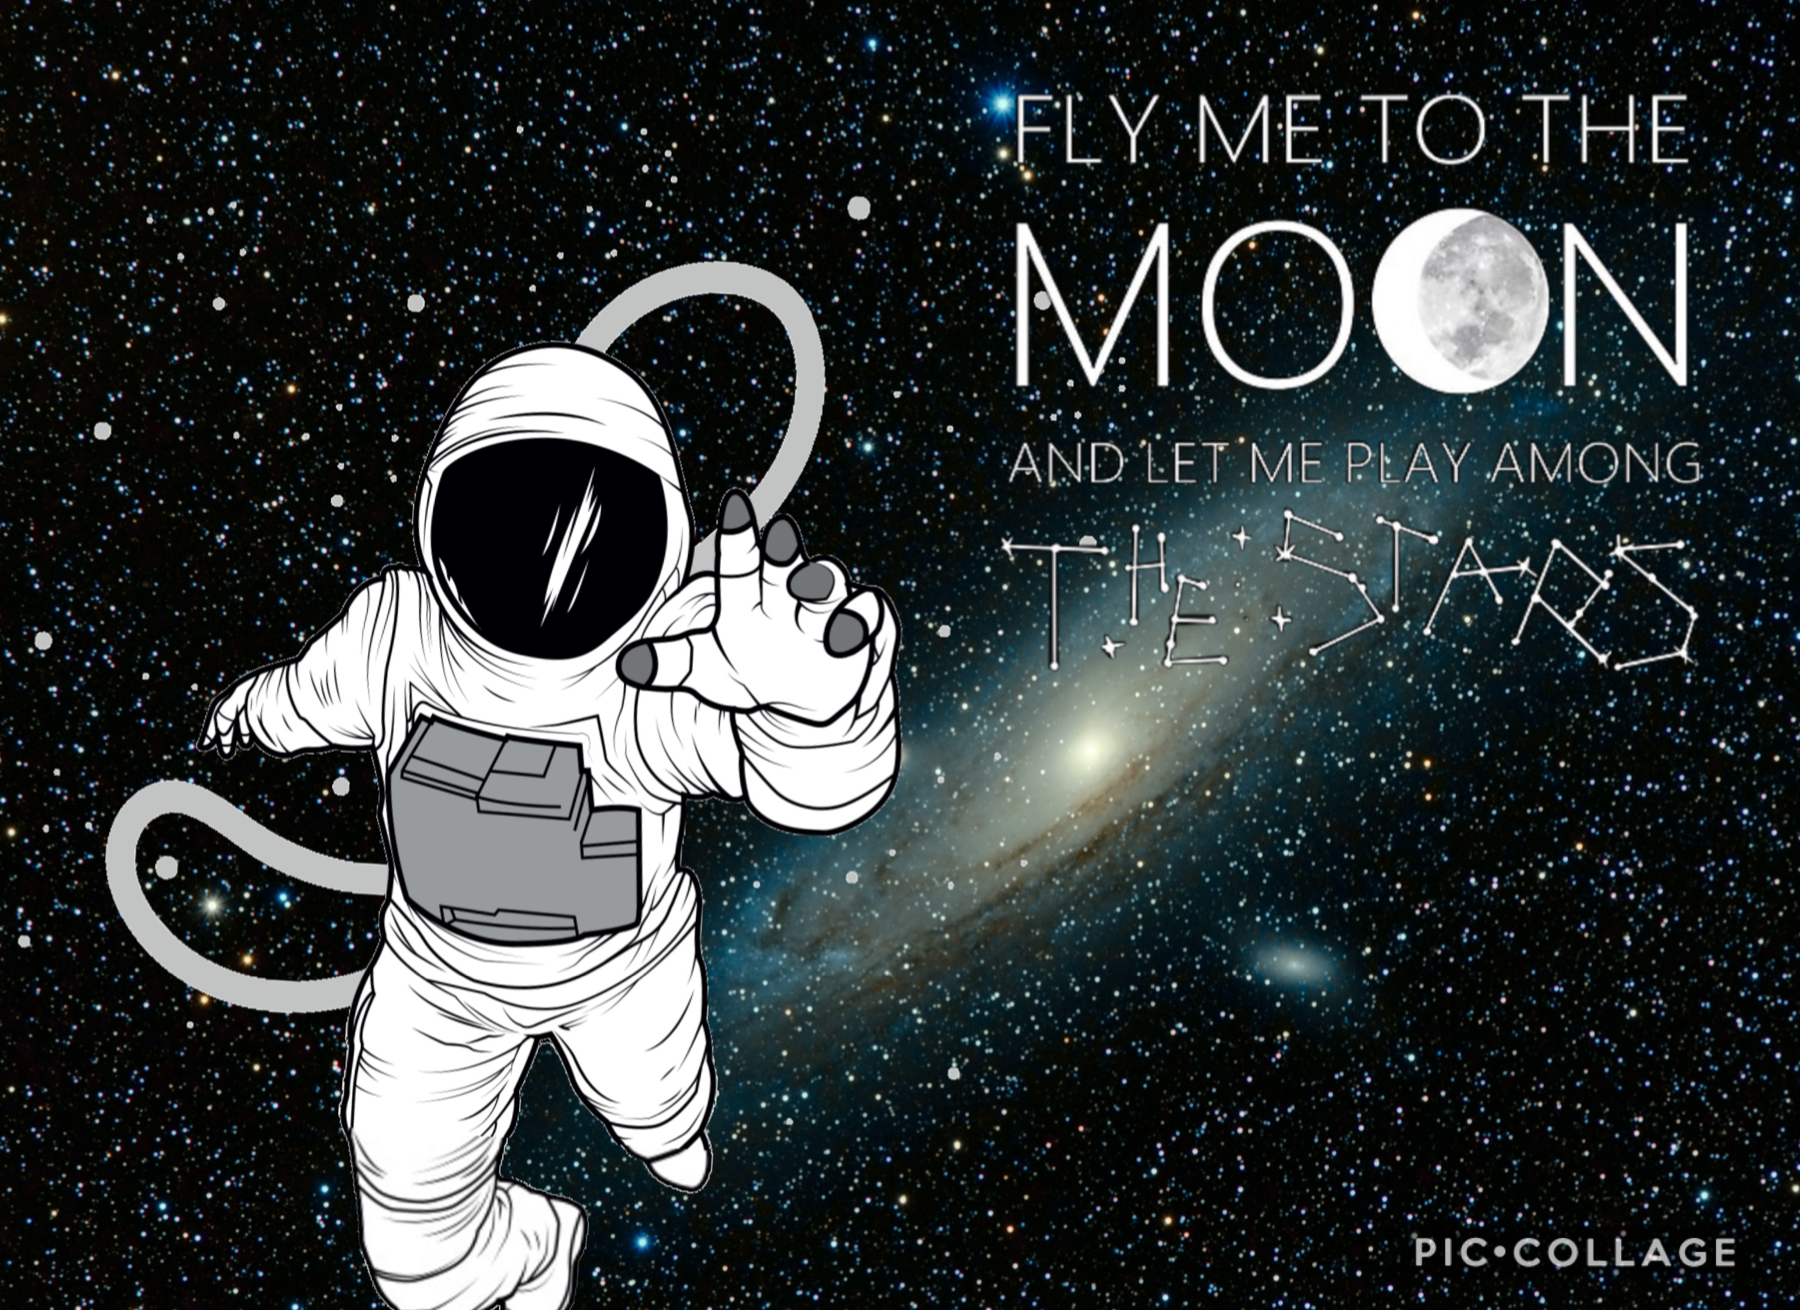 Fly me to the moon 🌚 